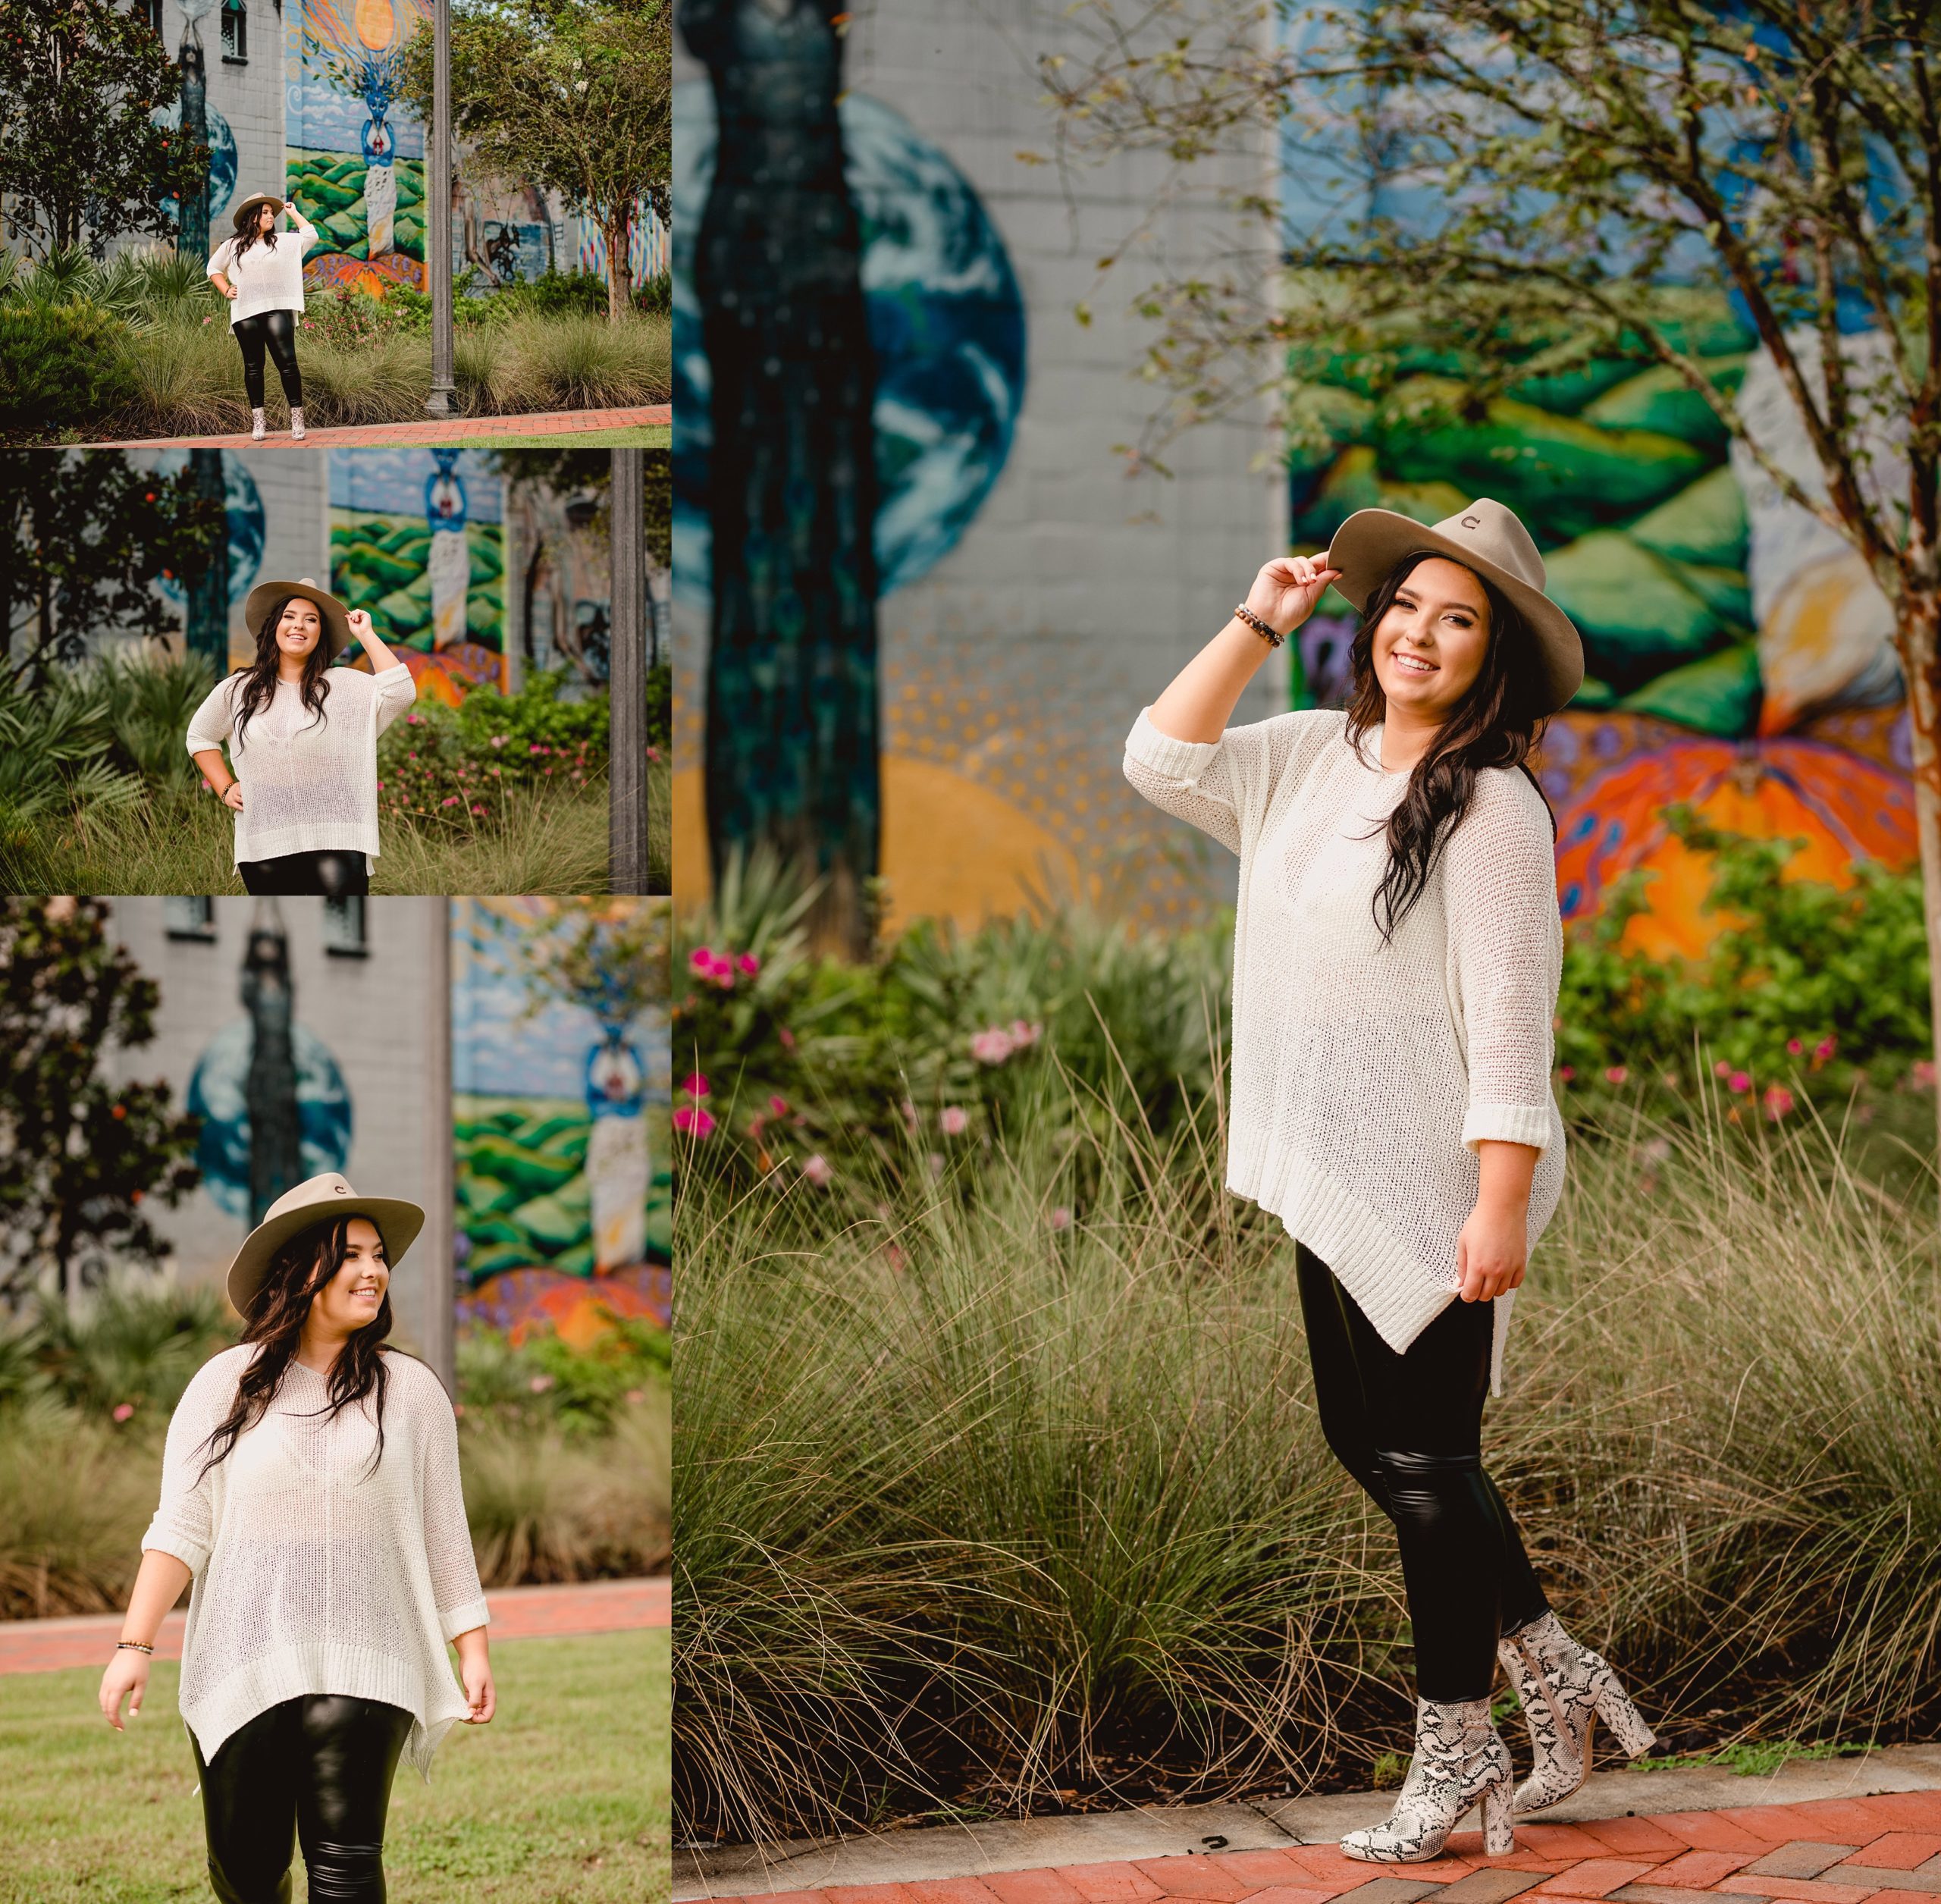 Artsy senior pictures with art mural in the background in North Florida.